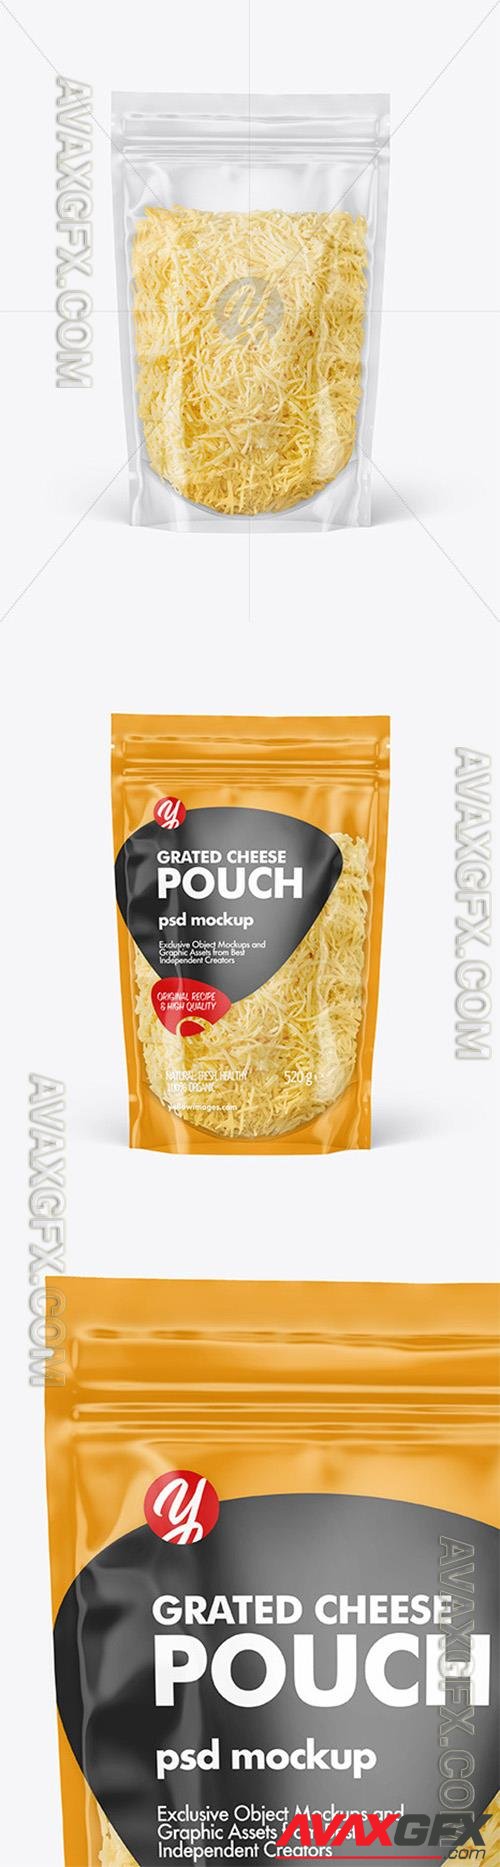 Clear Plastic Pouch w/ Grated Cheese Mockup 89219 TIF